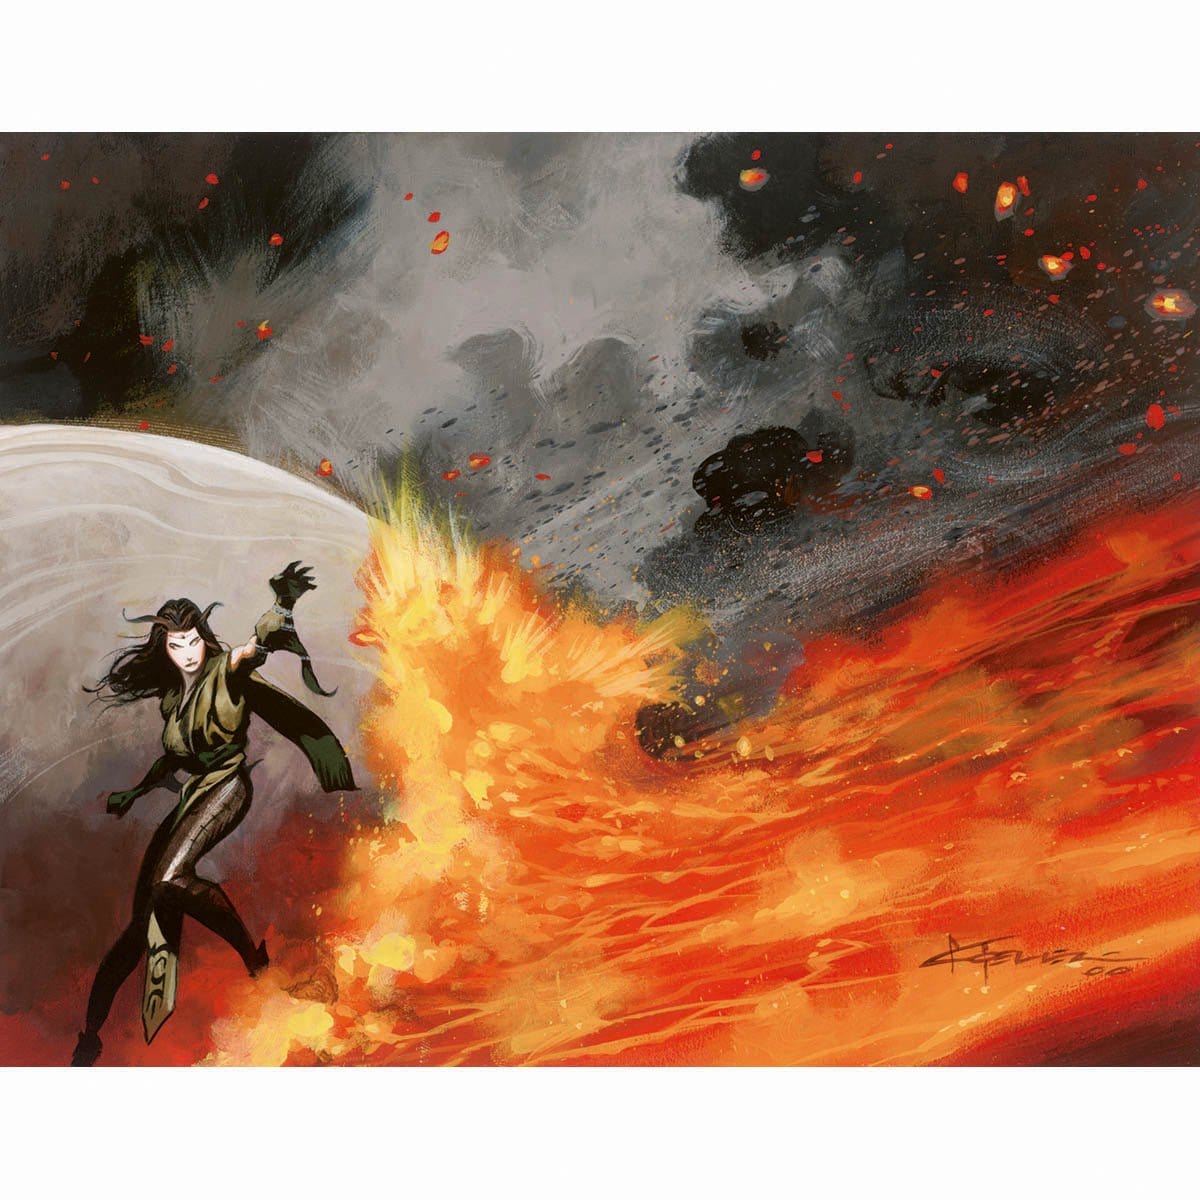 Sphere of Law Print - Print - Original Magic Art - Accessories for Magic the Gathering and other card games